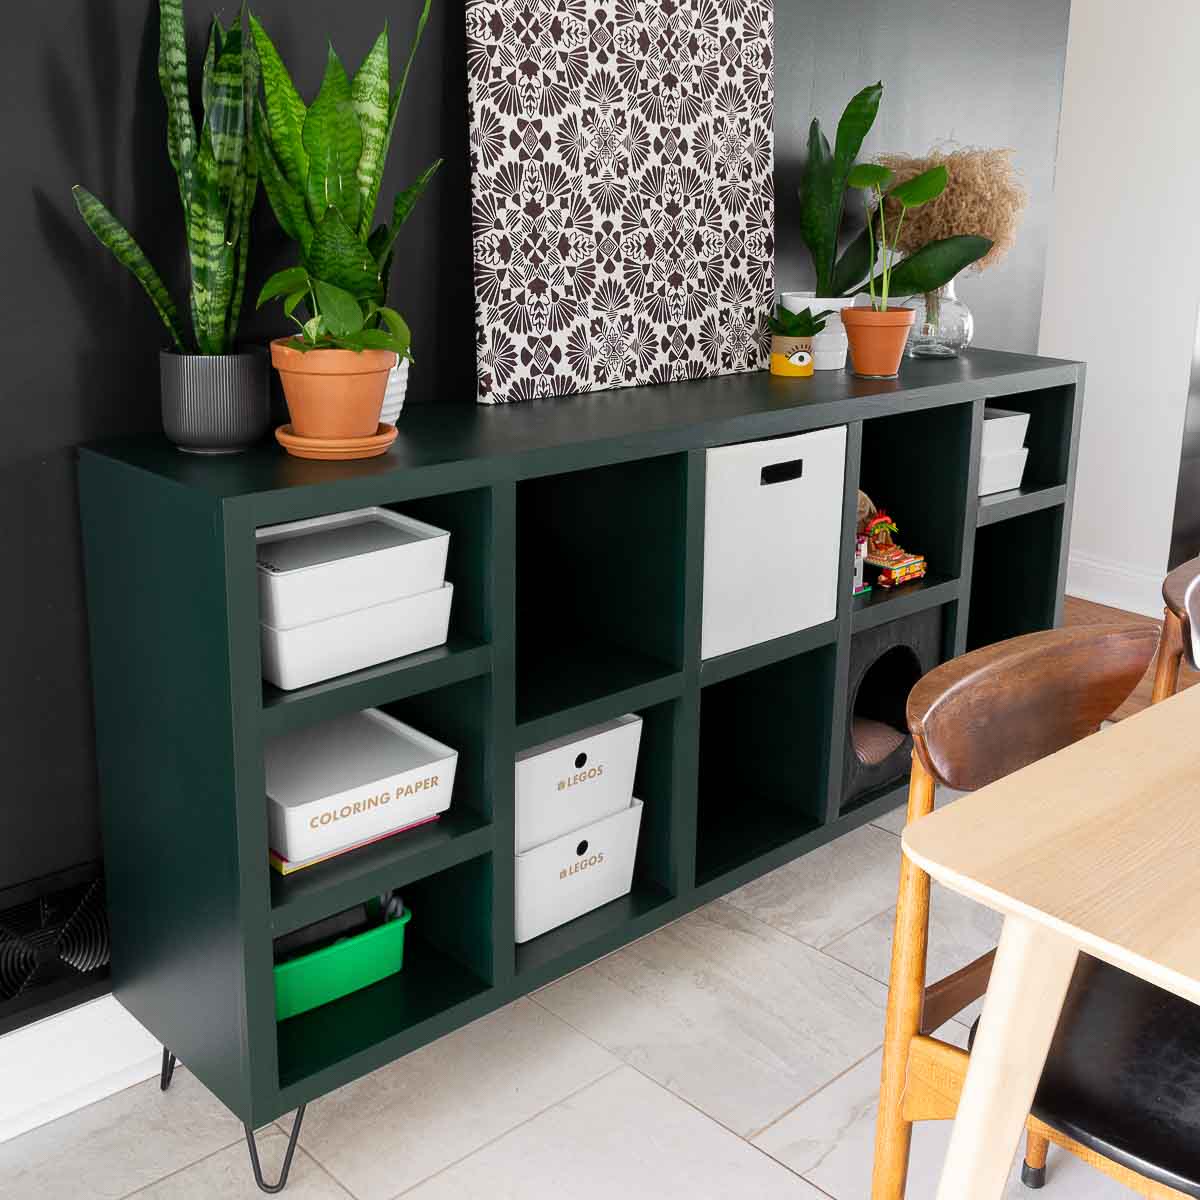 Modern cube storage unit with square cubbies and adjustable shelves on black furniture feet.